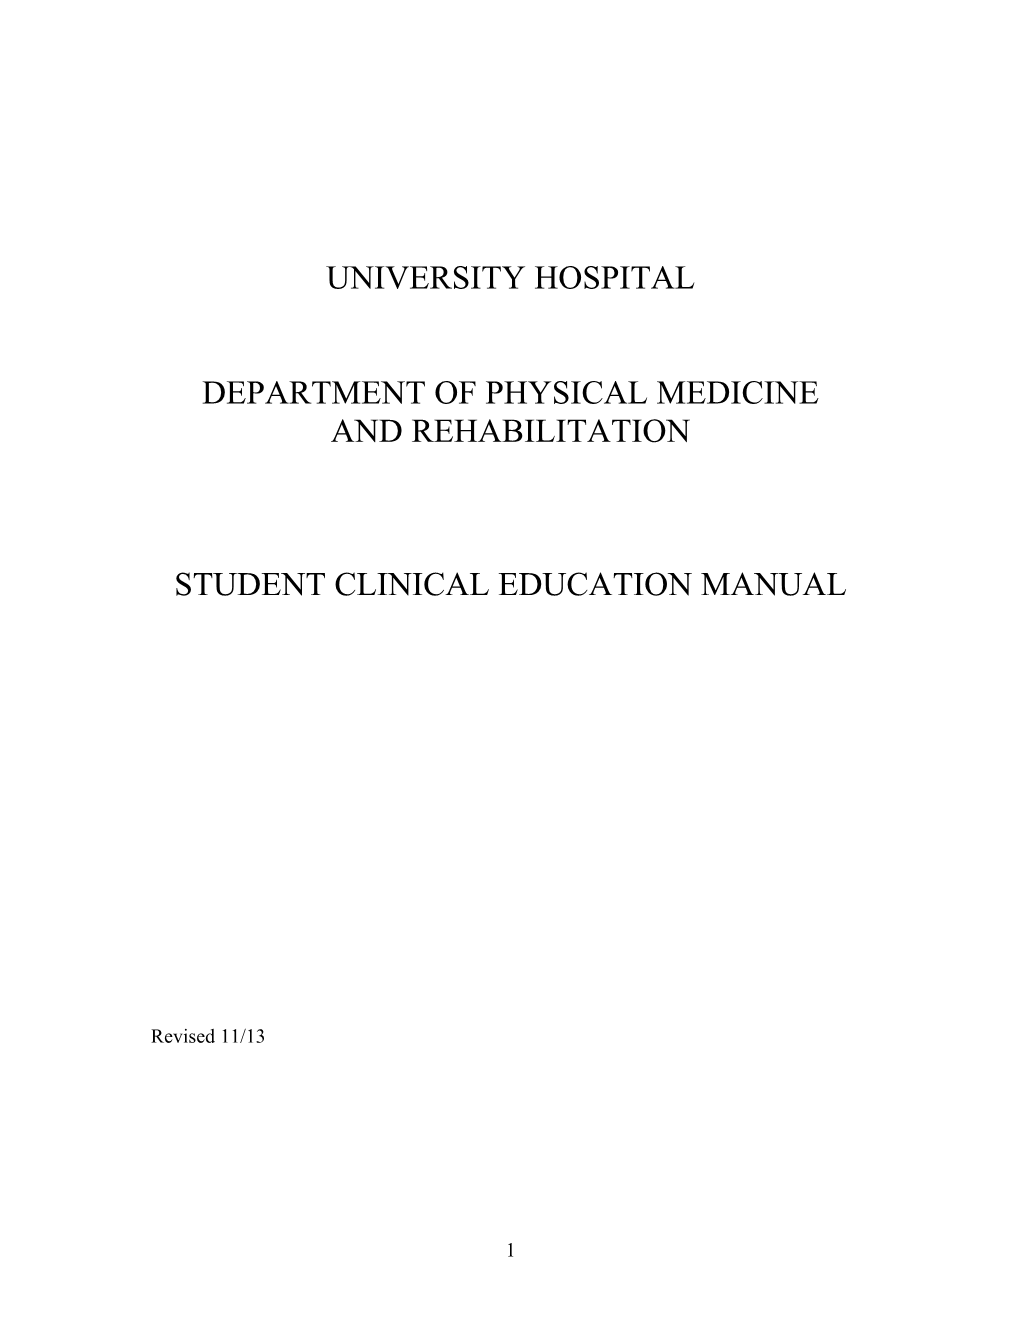 Department of Physical Medicine and Rehabilitation Organizational Chart